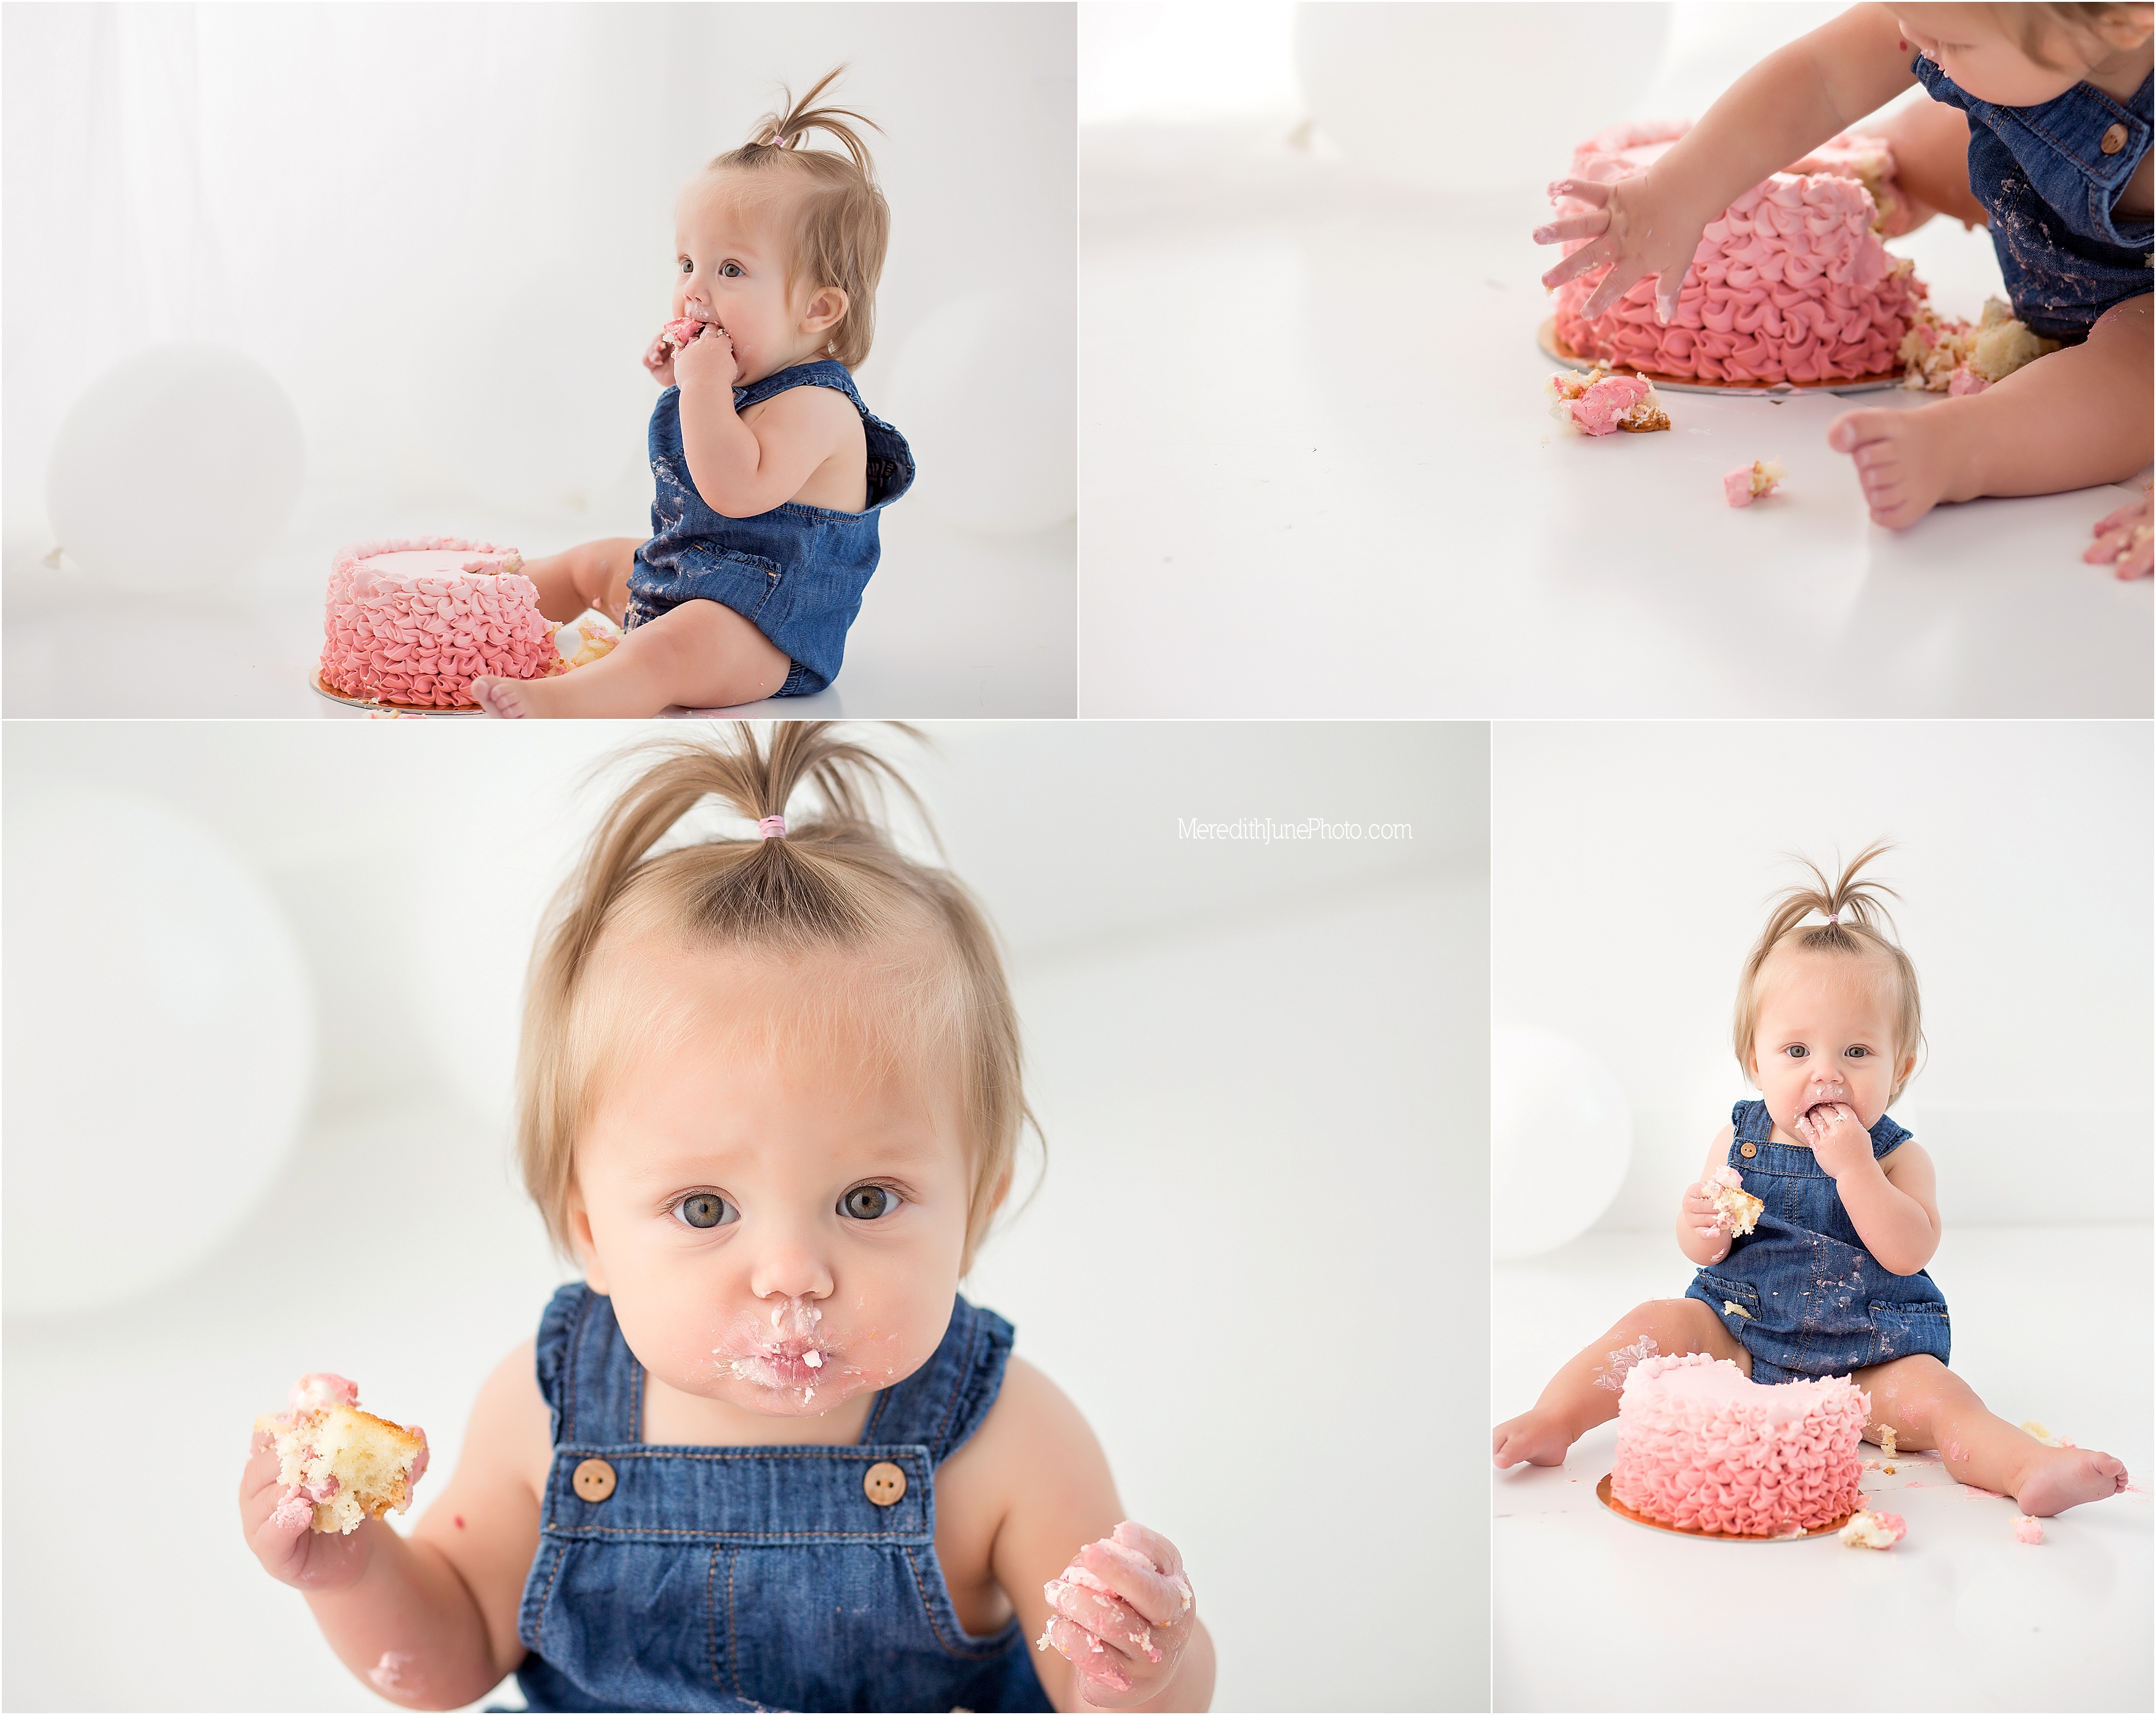 All white cake smash photo session at Meredith June Photography